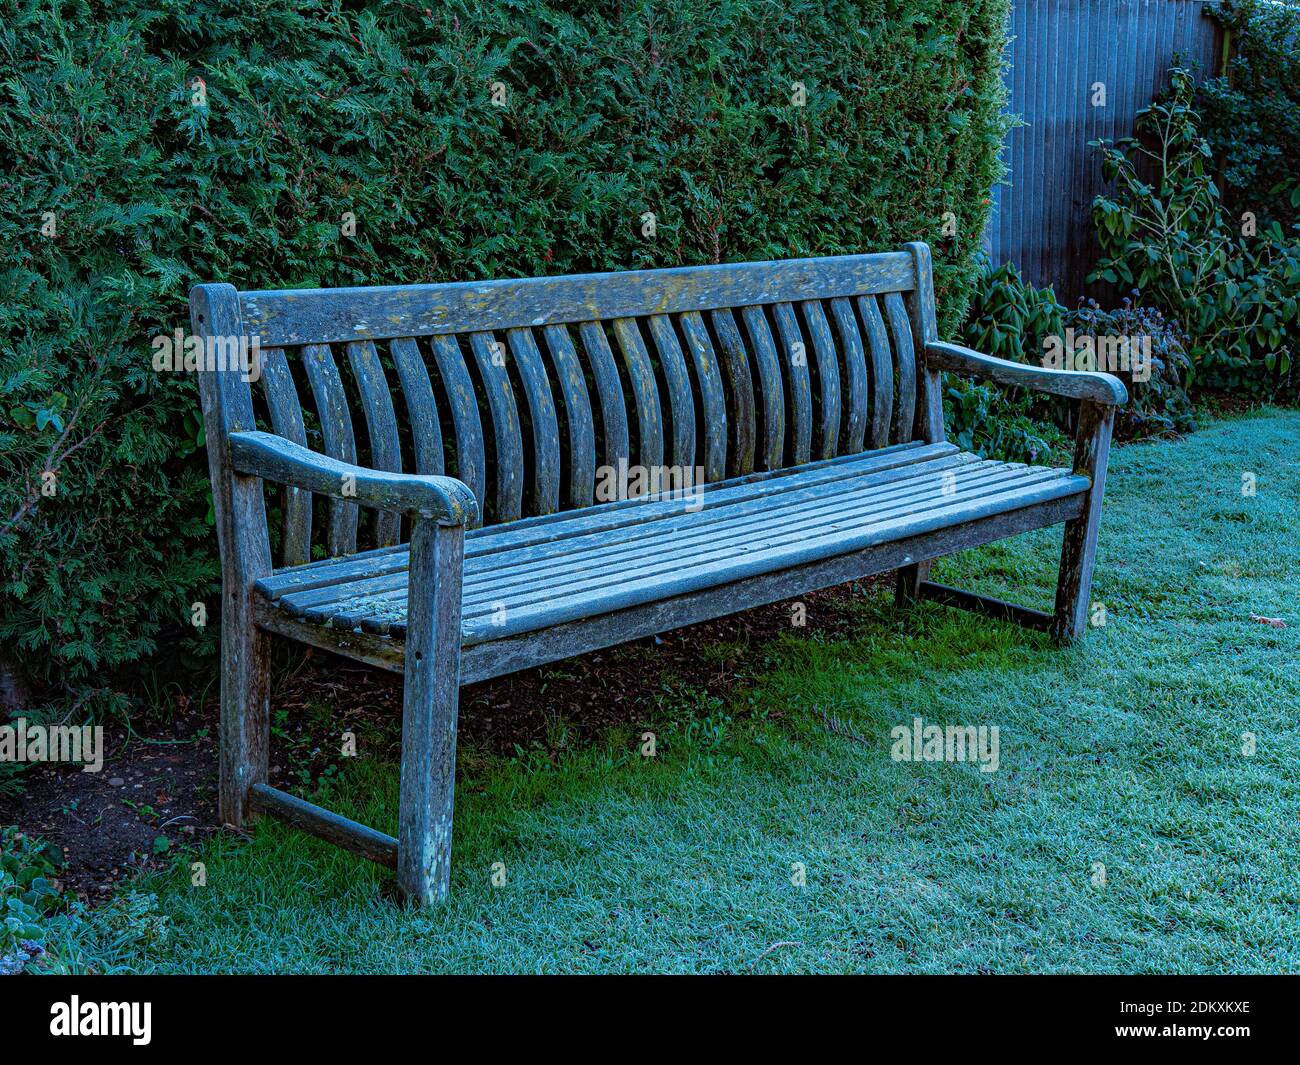 Closeup of early morning winter frost on an old wooden bench, outdoors in a garden / yard / park. Stock Photo